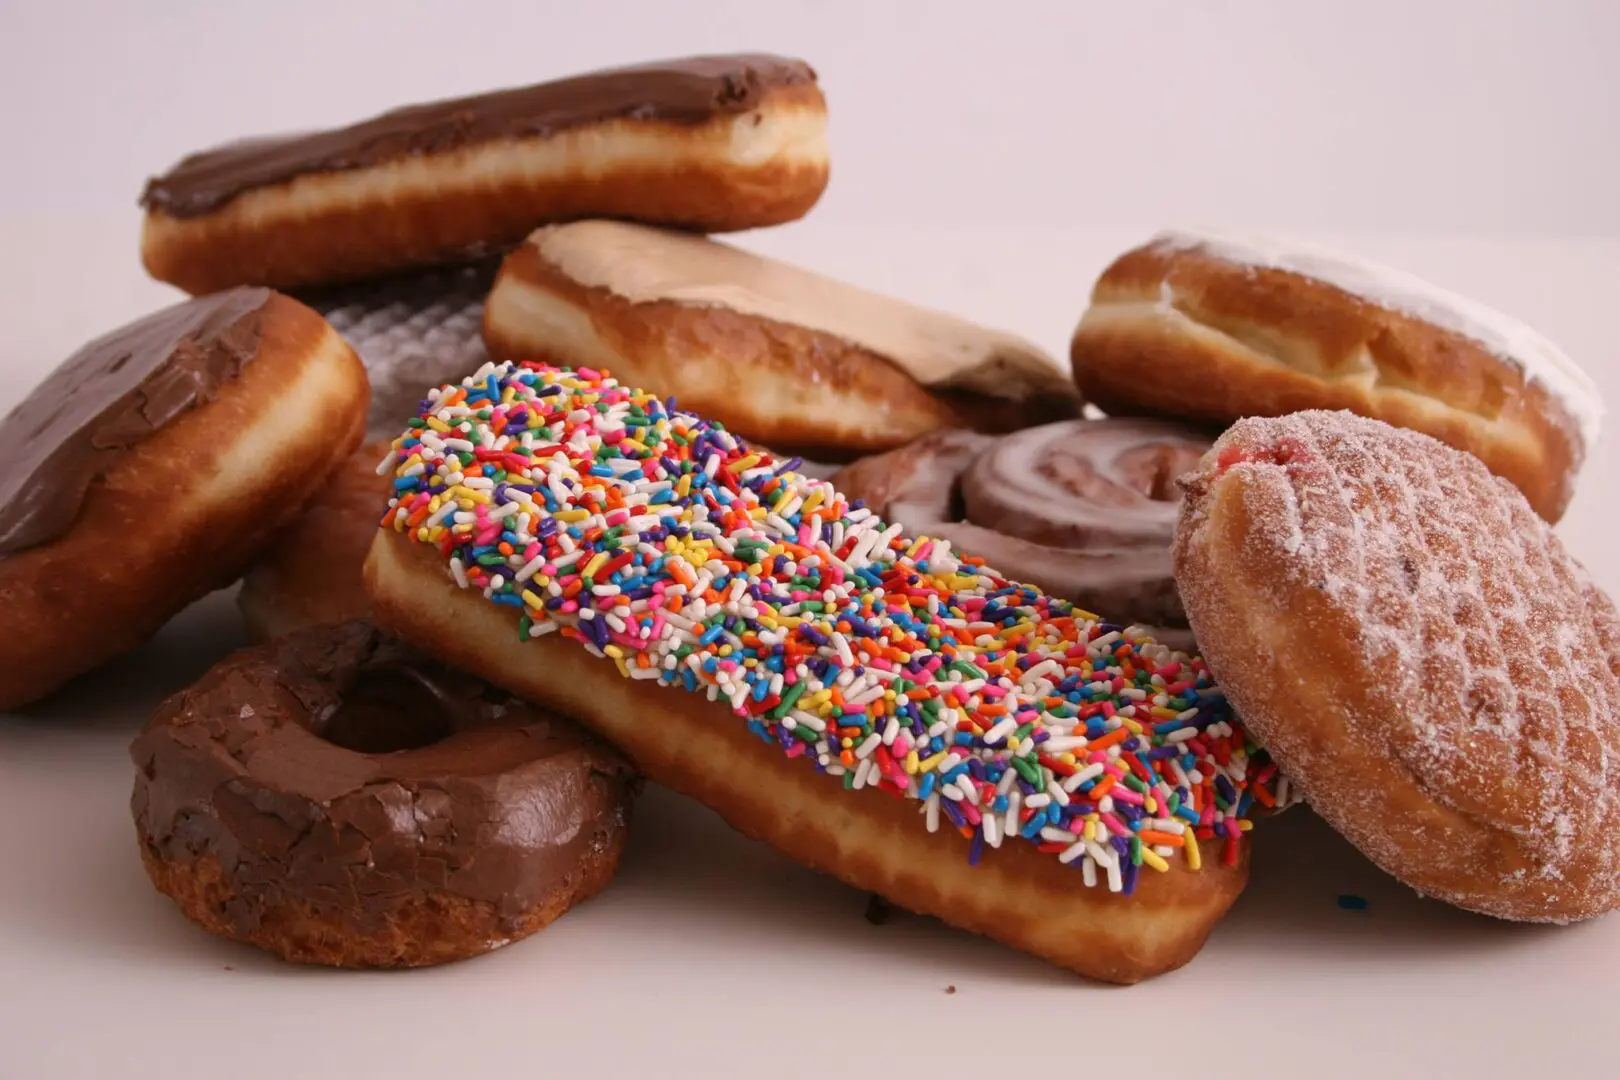 A pile of donuts on a white table.